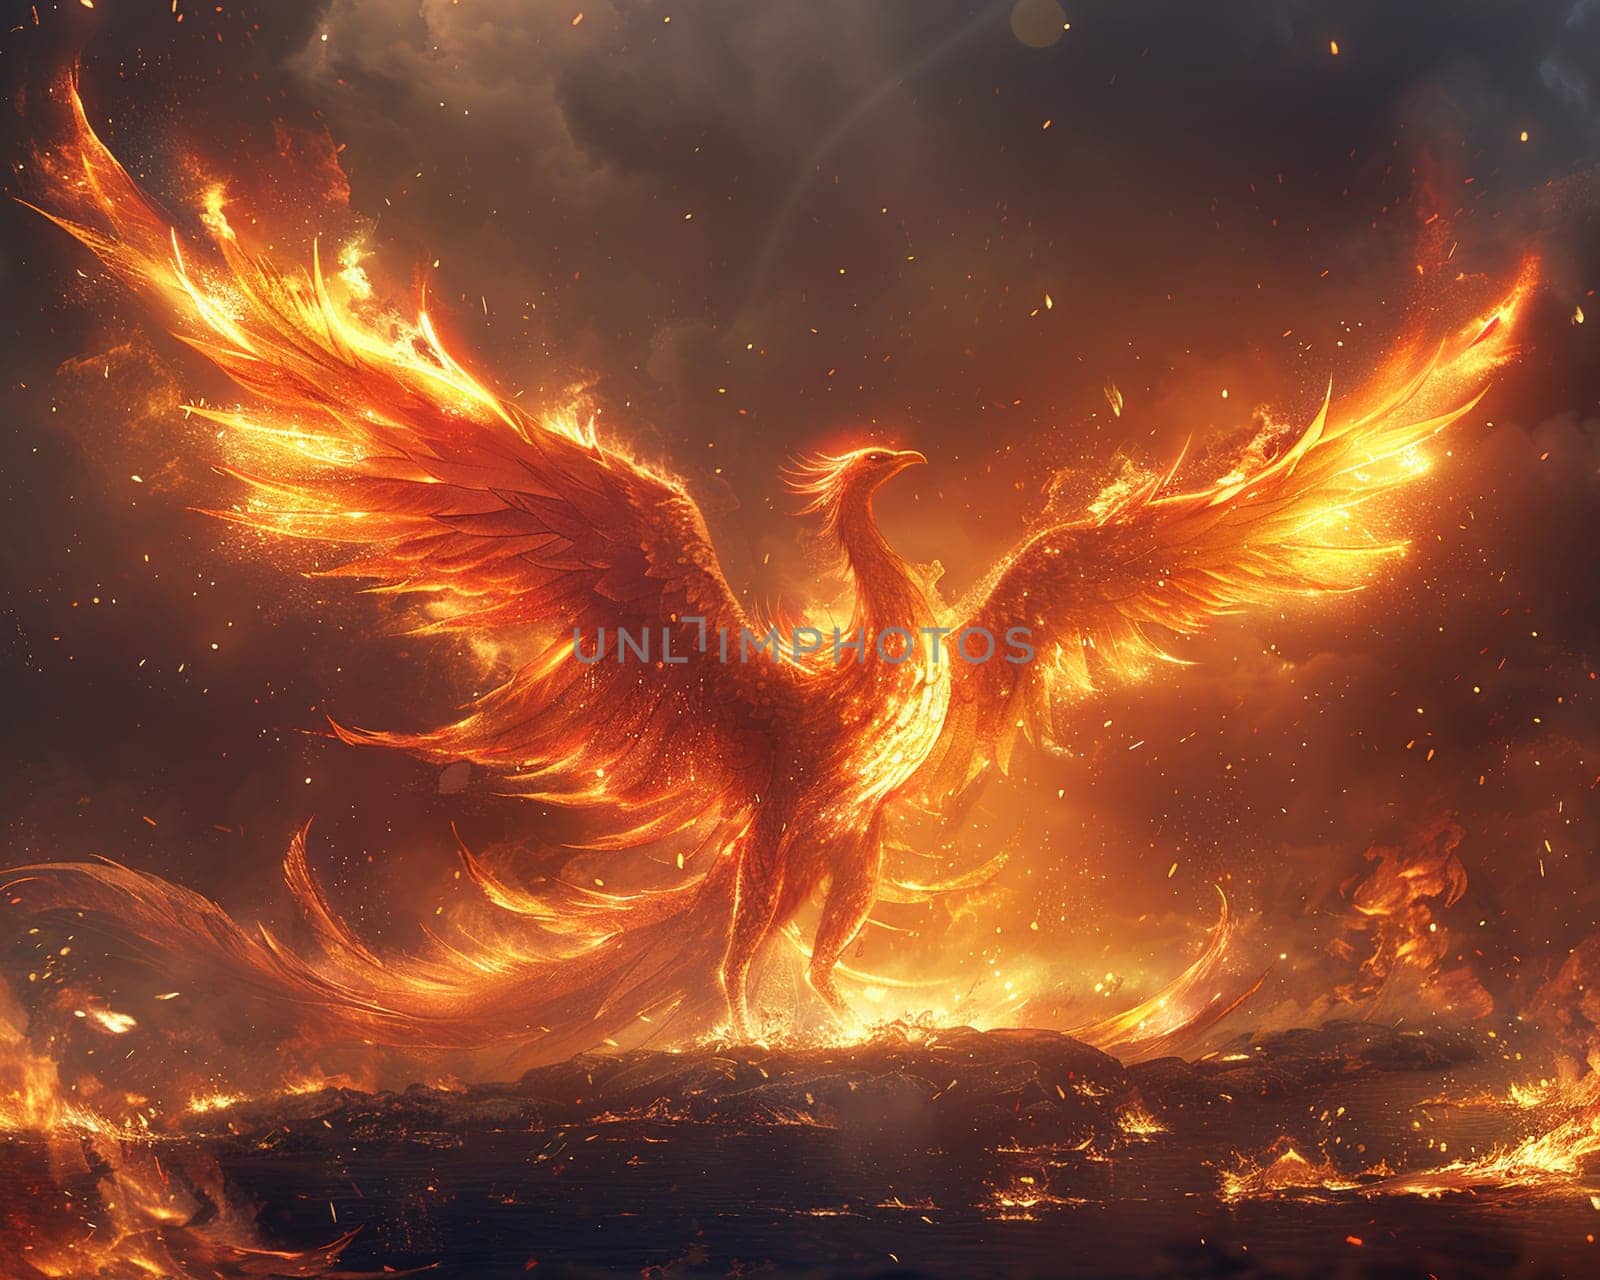 Mythical phoenix rising from ashes, captured in an anime style with fiery colors and dramatic lines.